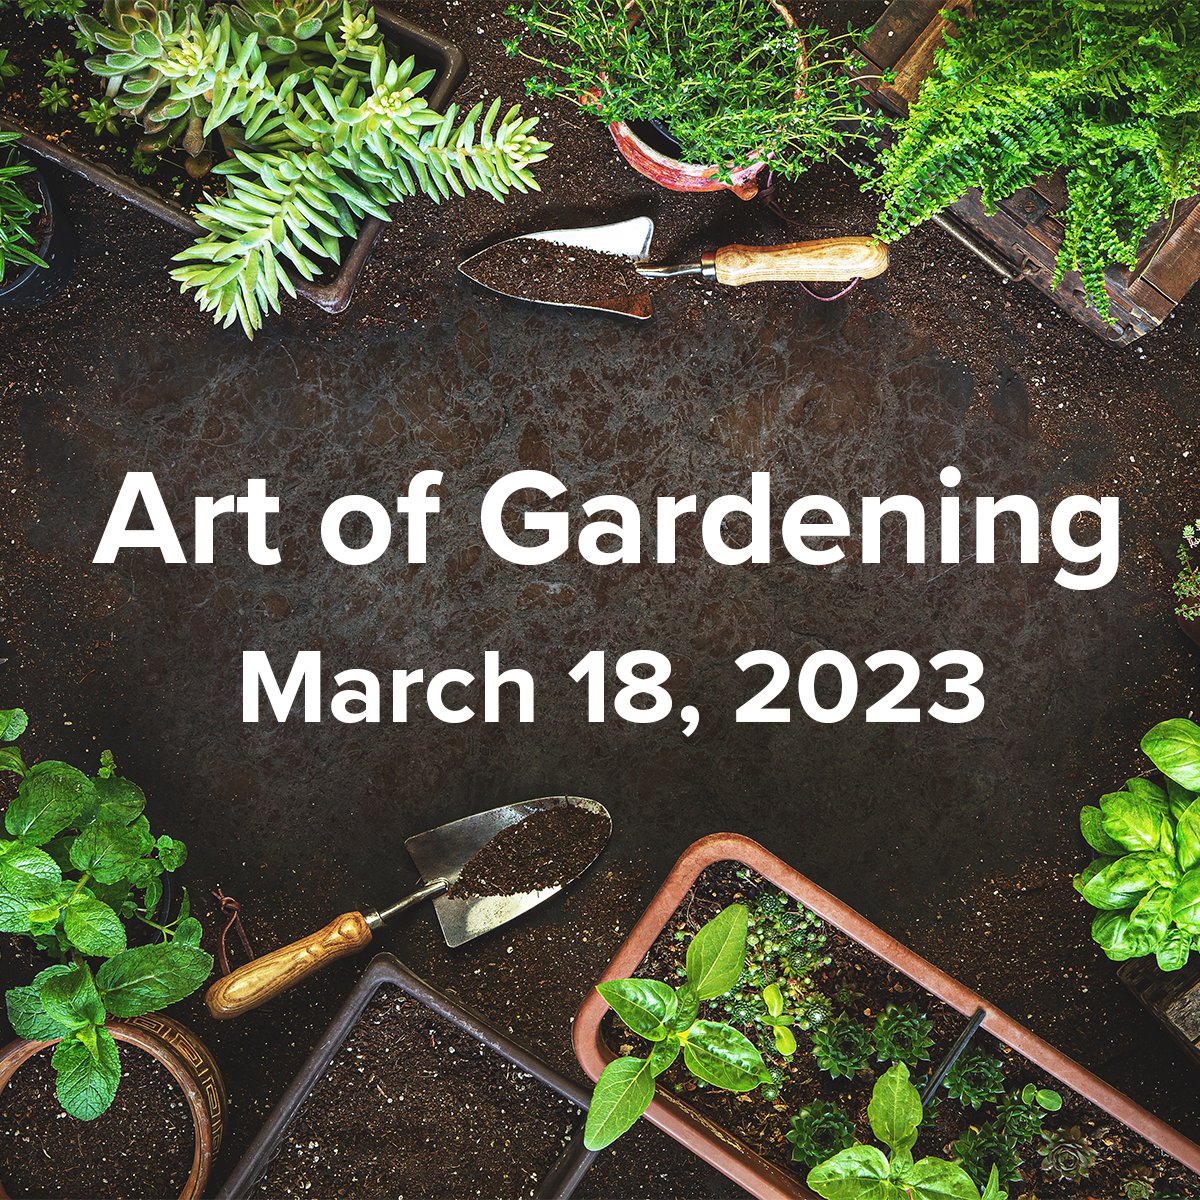 Who else is ready for spring? Start planning your garden with us at the annual Art of Gardening seminar - see the session options and how to register at eicc.edu/ArtOfGardening   🌼 #Muscatine #MasterGardeners #Gardening #THECommunitysCollege